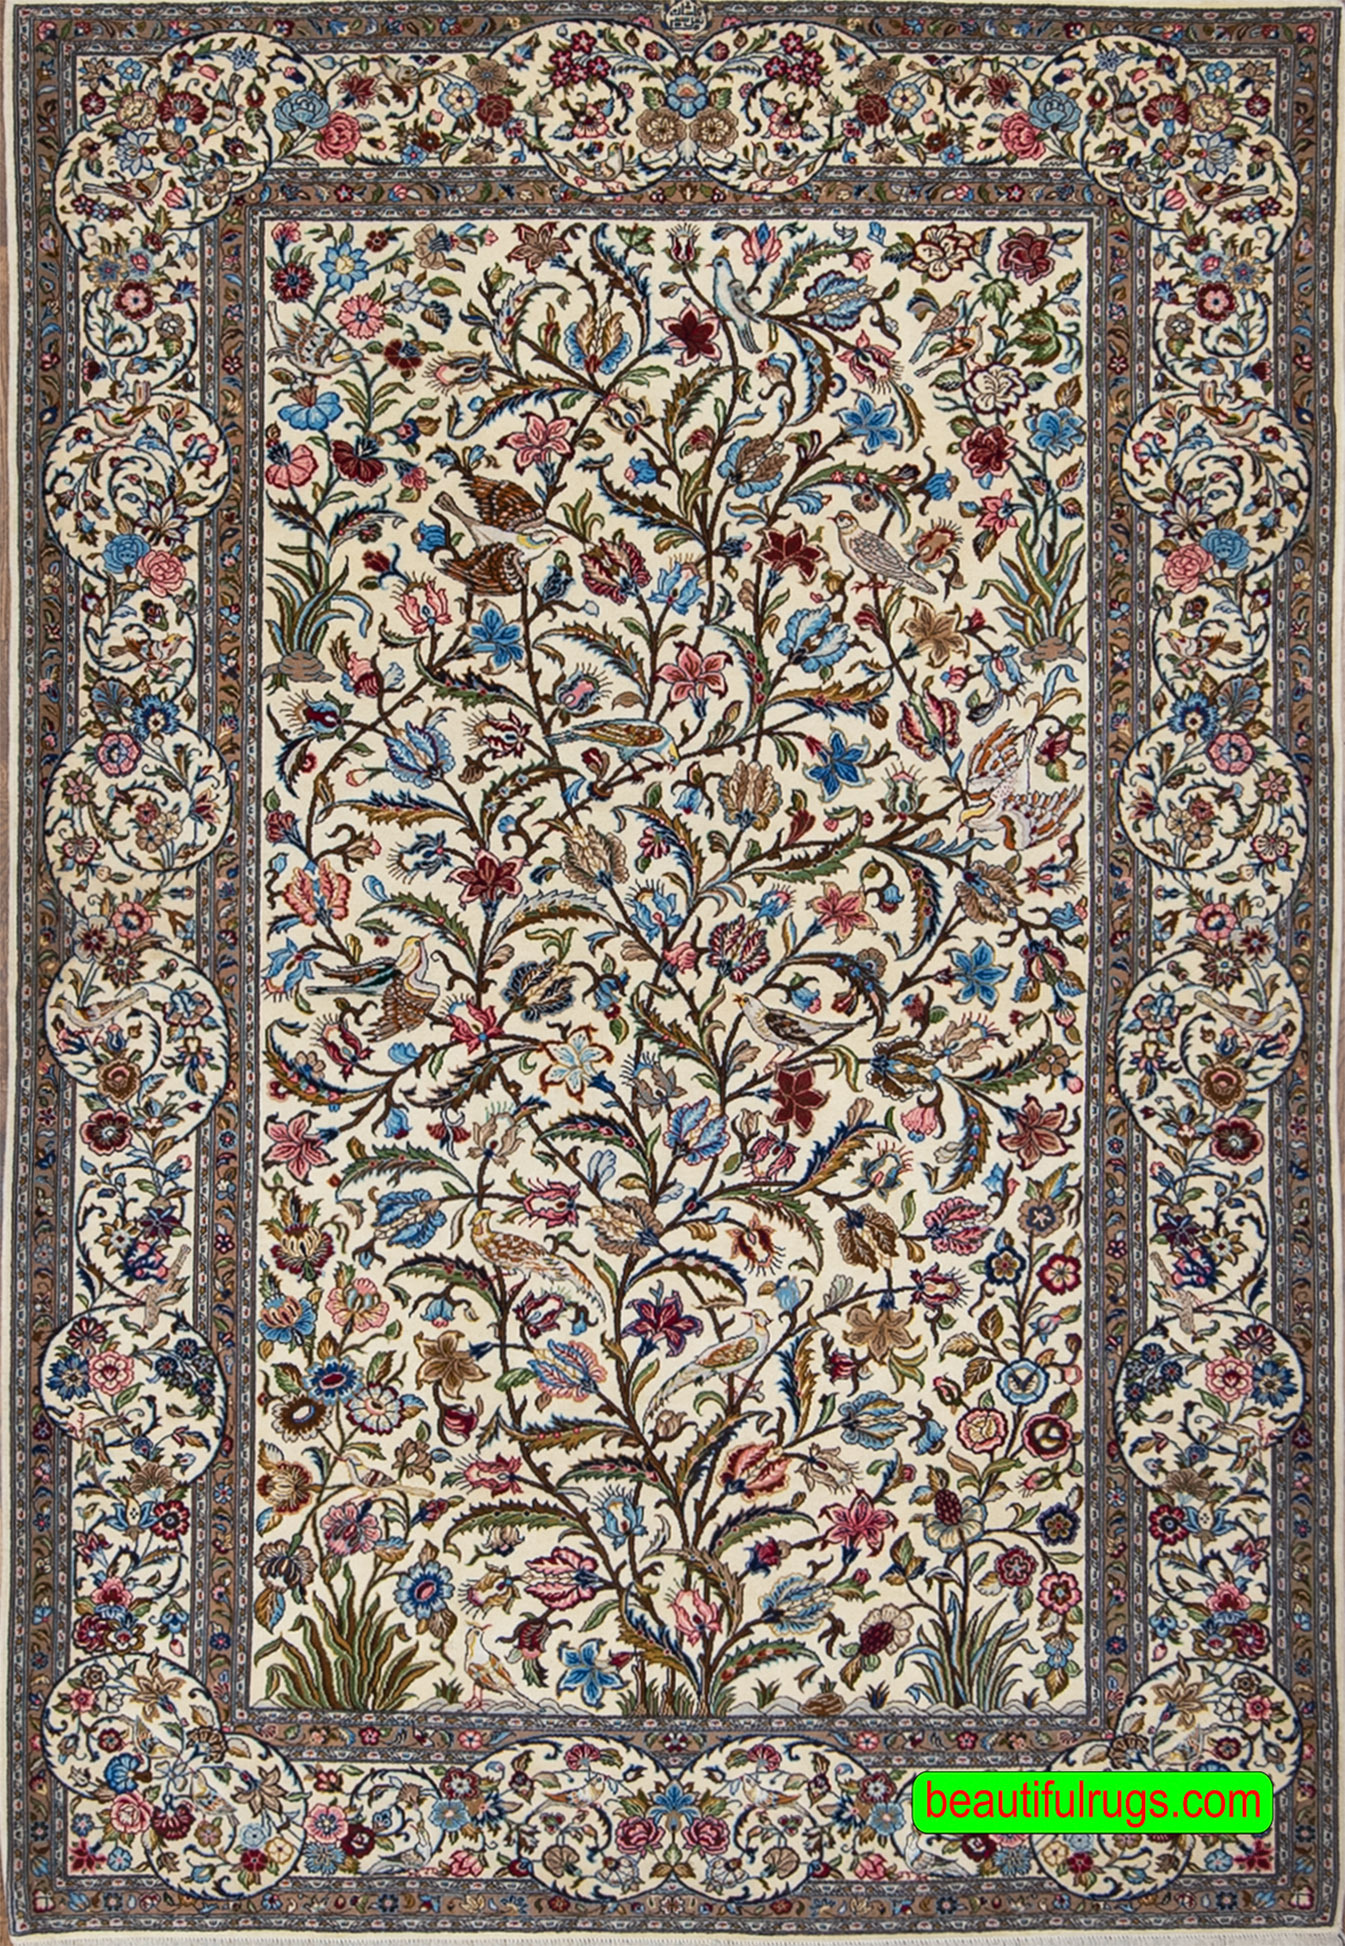 Vintage Persian Kashan Rug, Hand Woven Tree of Life Rug with Birds